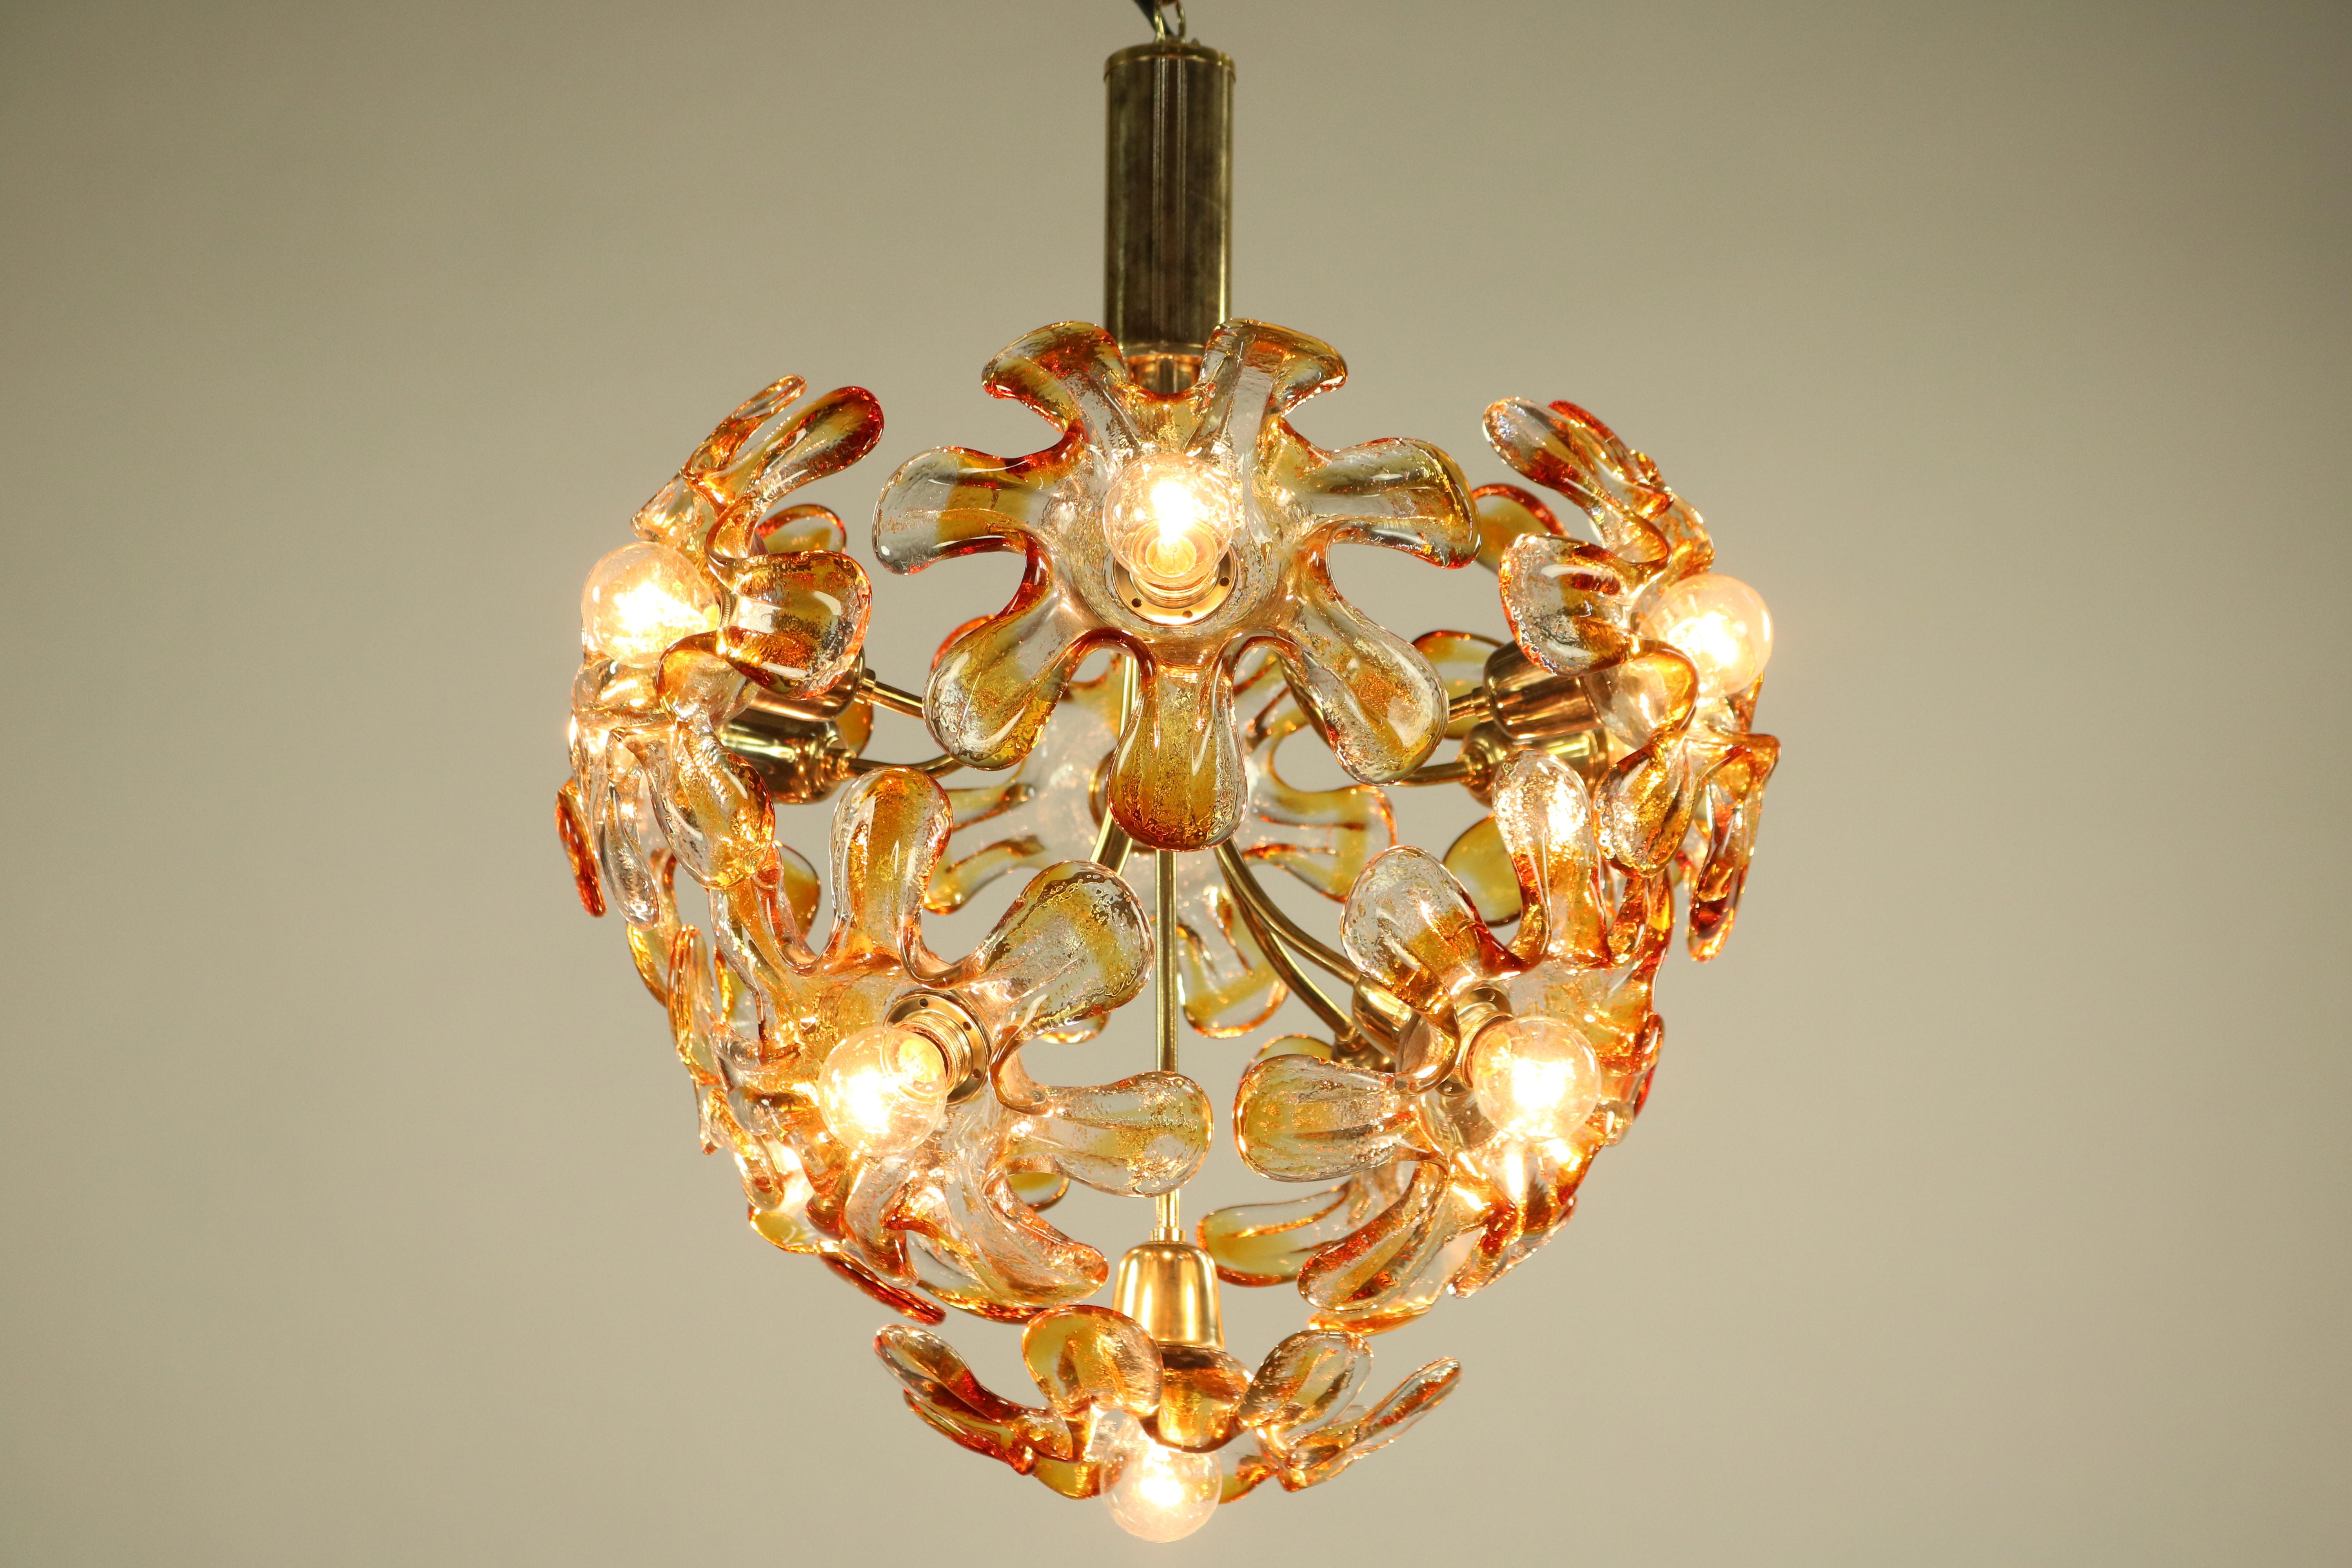 1960s pendant light - Murano glass chandelier
Made of a gilded steel frame with 11 clear and amber colored glass blossoms
This is the large version there were also smaller ones available
In very fine condition only one glass part with a small cut